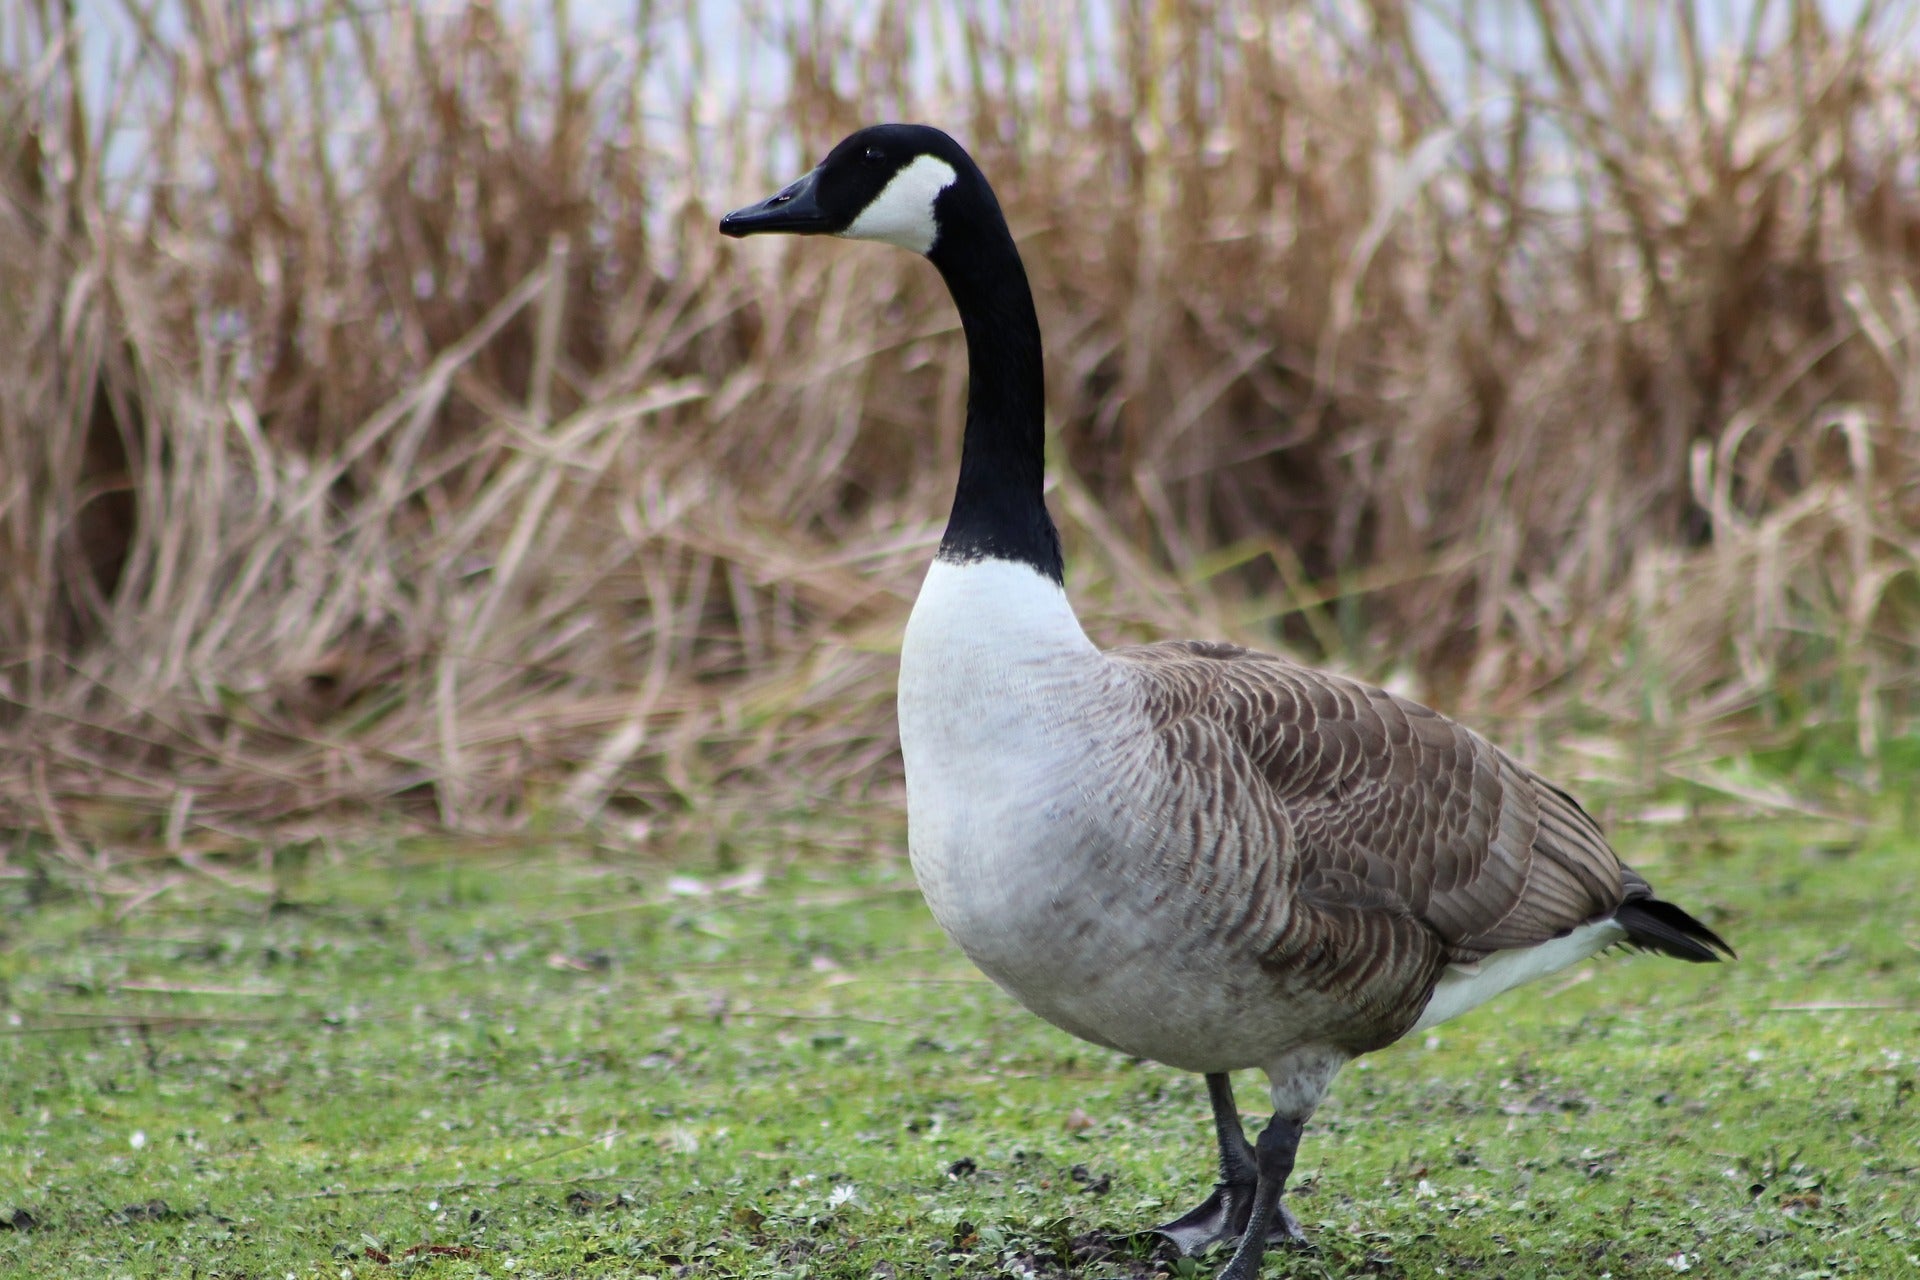 A Canada goose walking on the grass.